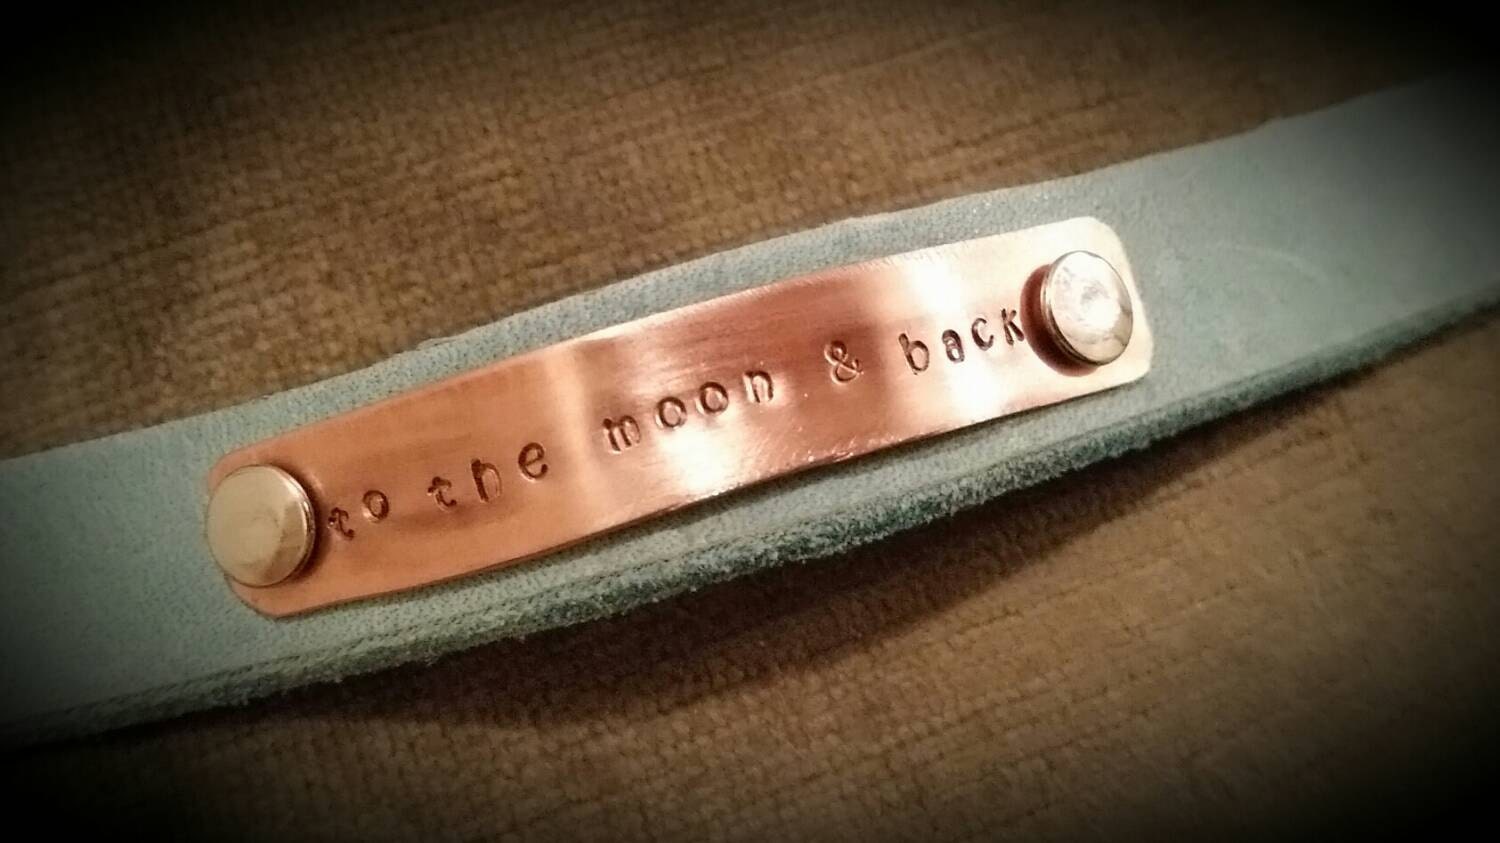 Kids Stamped Copper Upcycled Leather Bracelet Cuff with Quote from Guess How Much I Love You "To the Moon and Back"